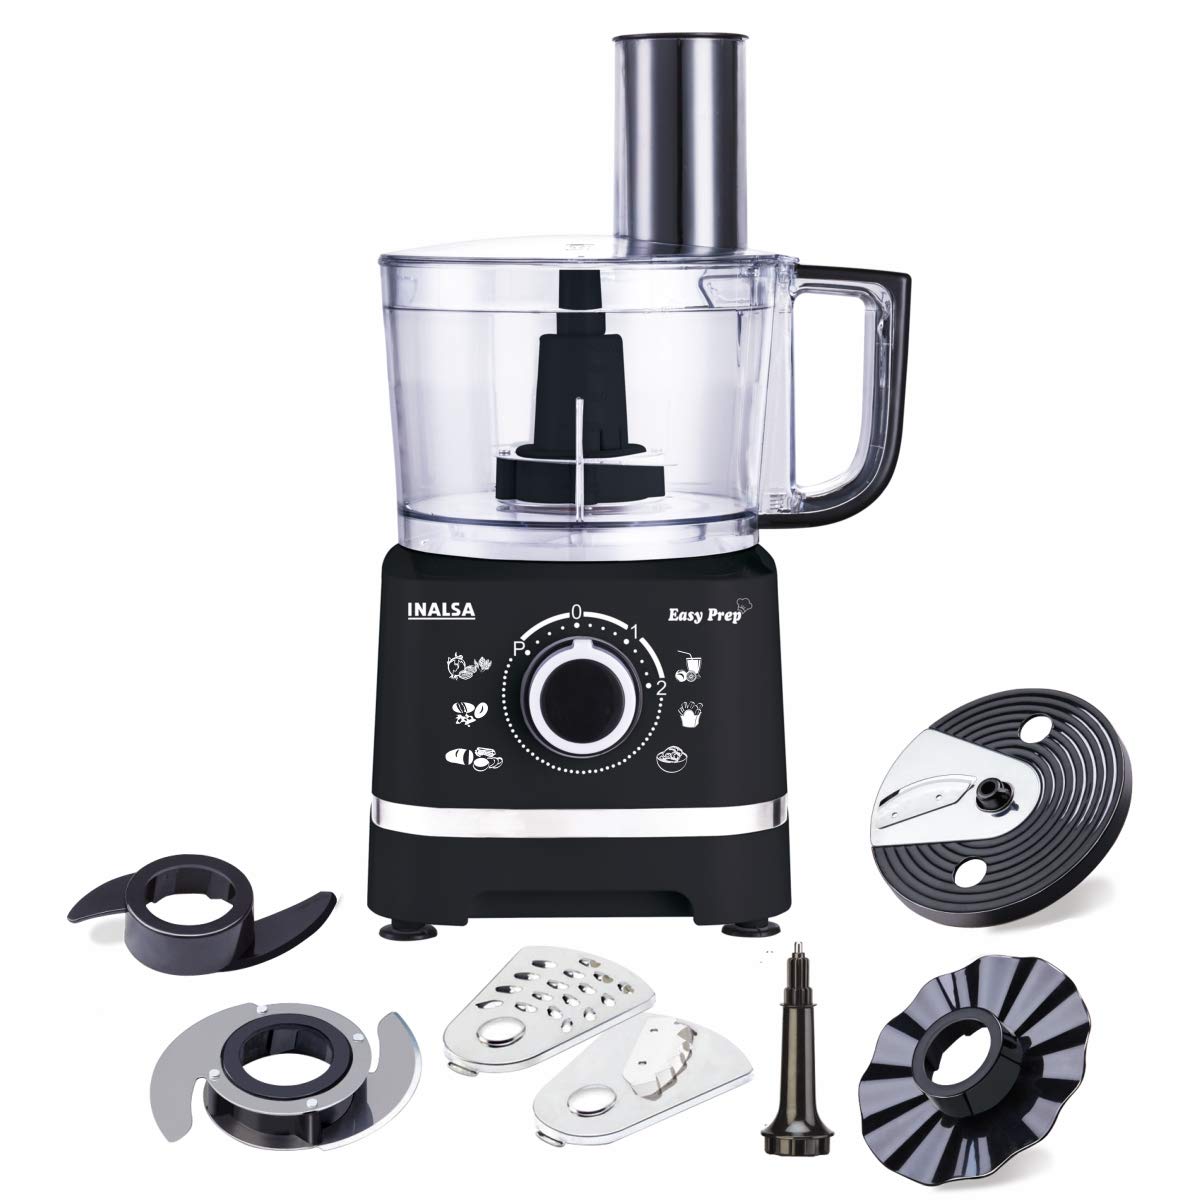 Best Inalsa Food Processor In India